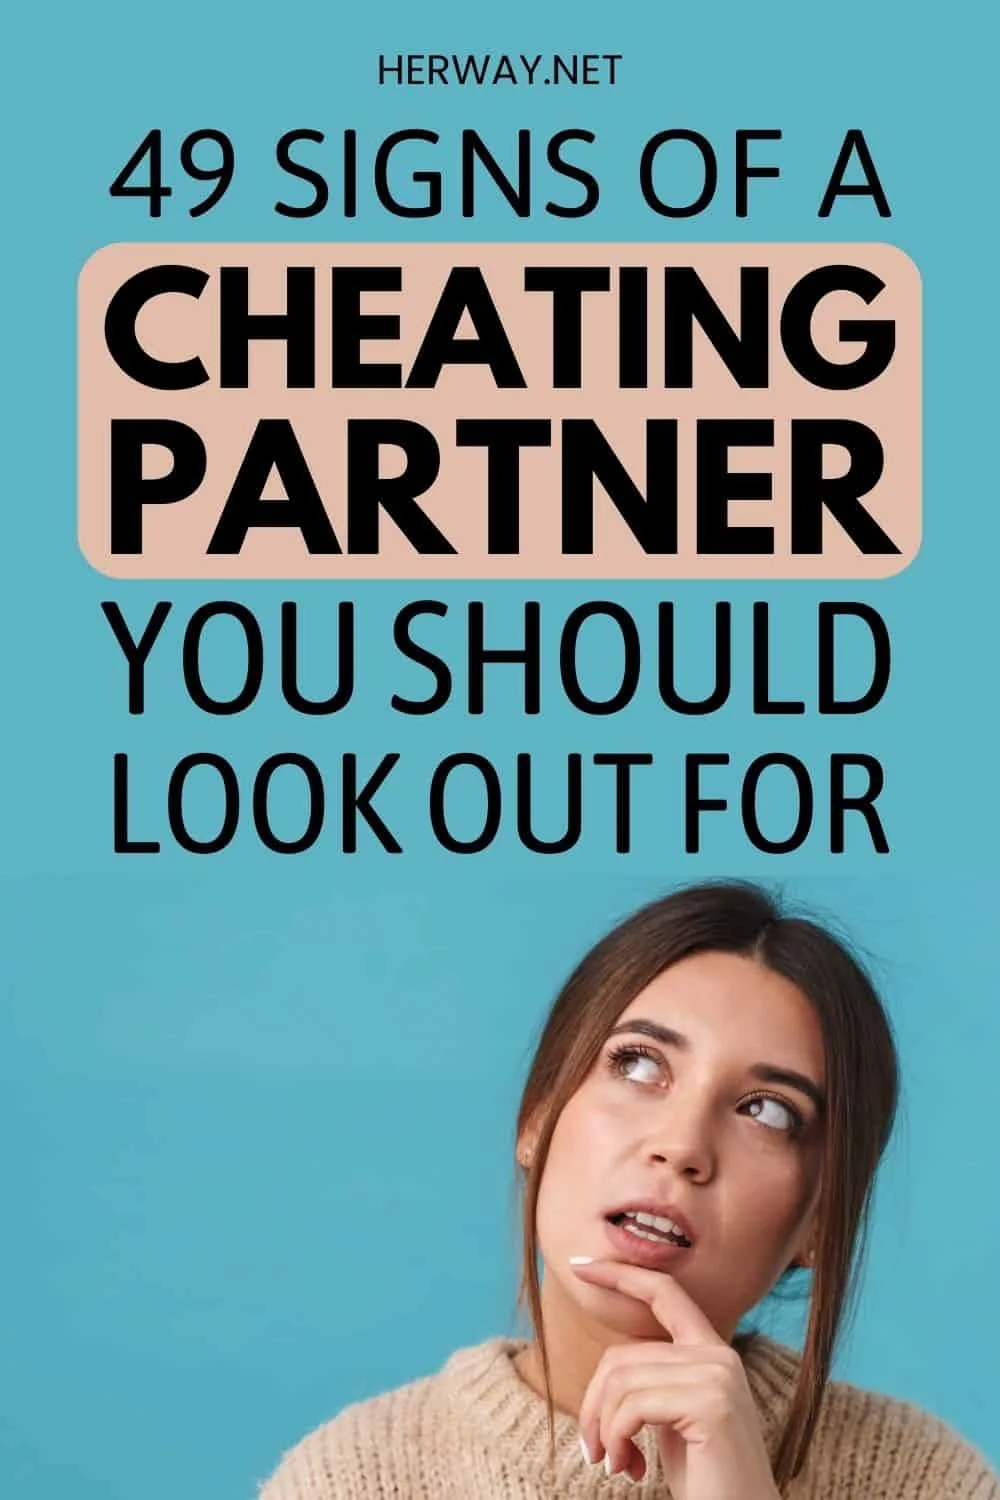 49 Signs Of A Cheating Partner You Should Look Out For Pinterest